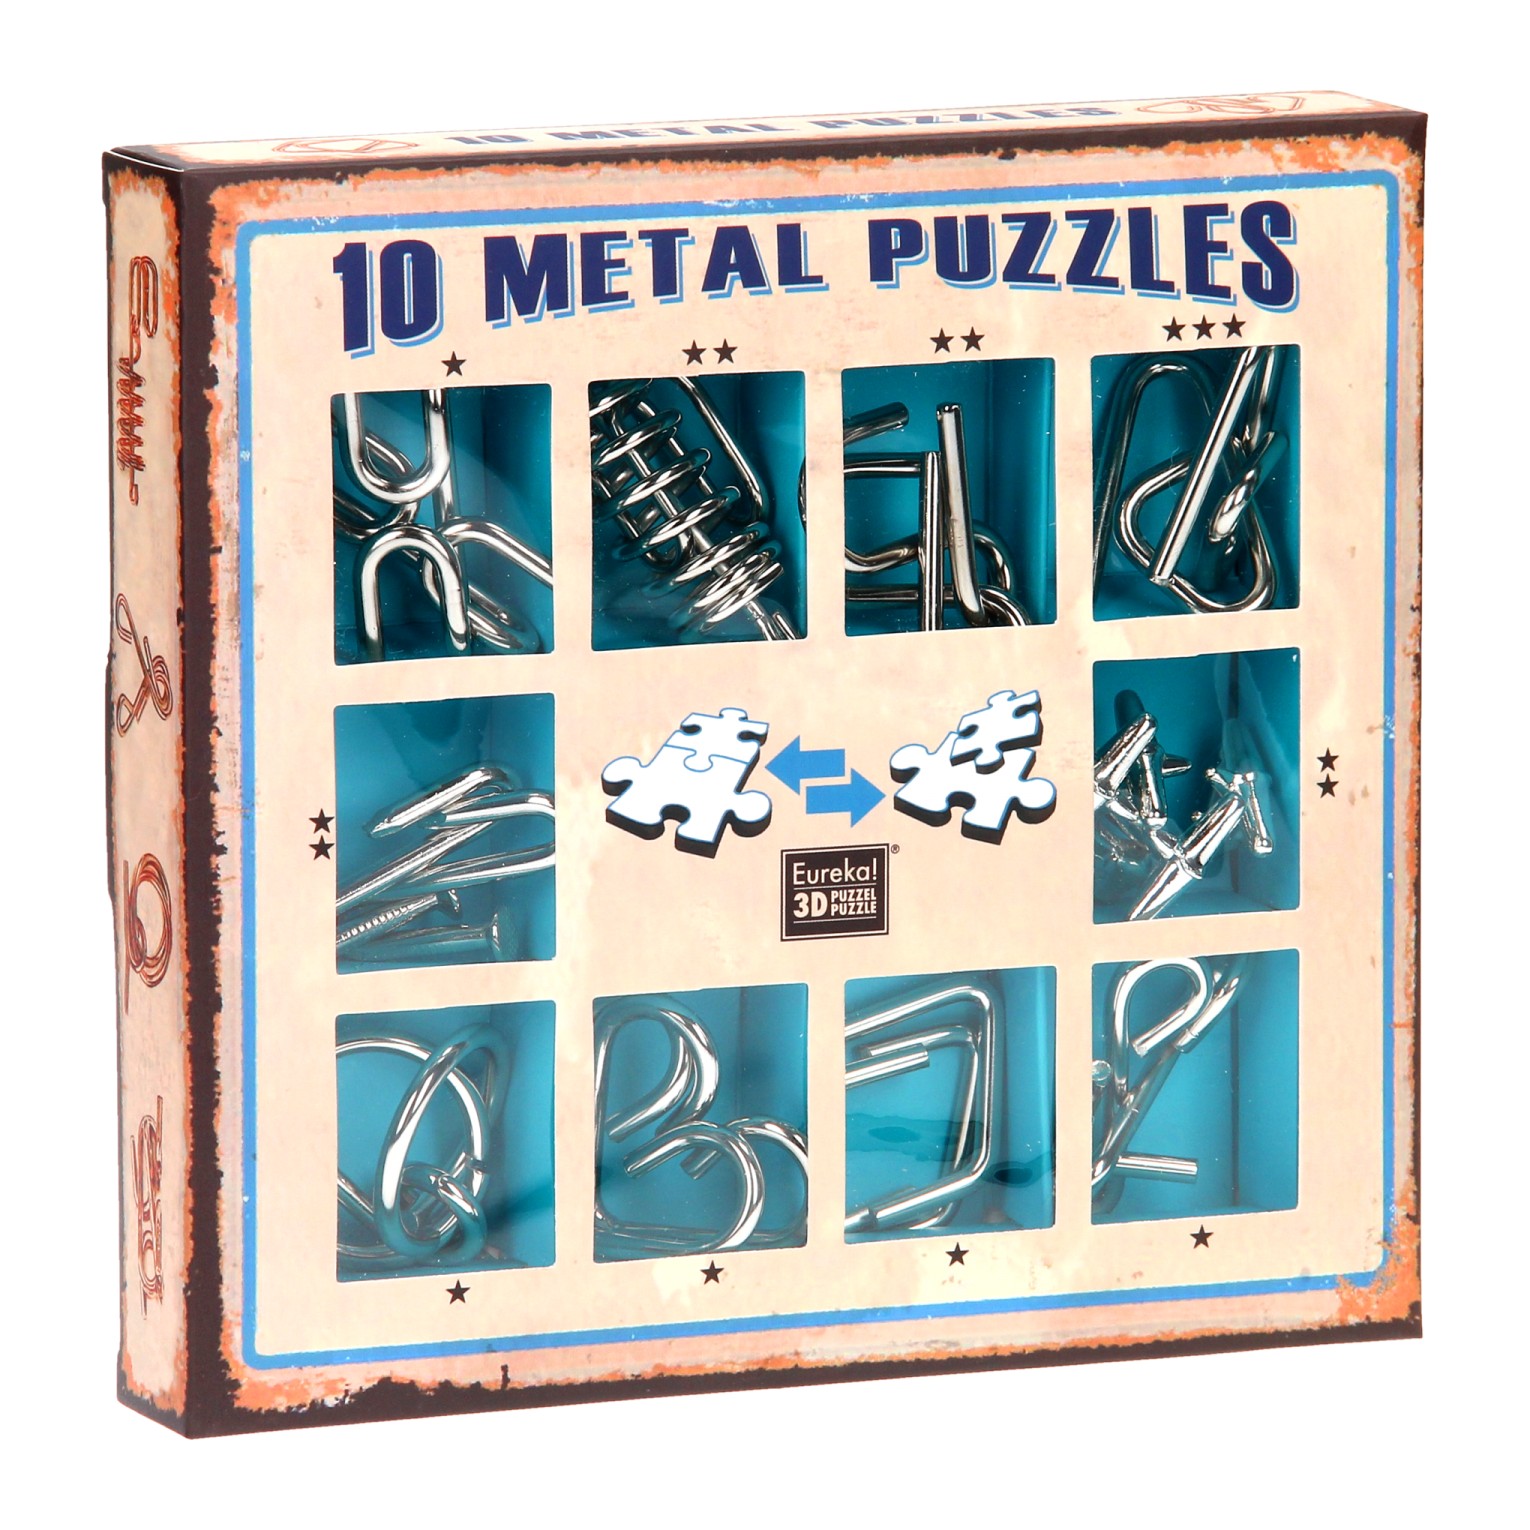 Eureka Metal Puzzle set - 10 Metal puzzles set - Blue (only available in display 52473355)